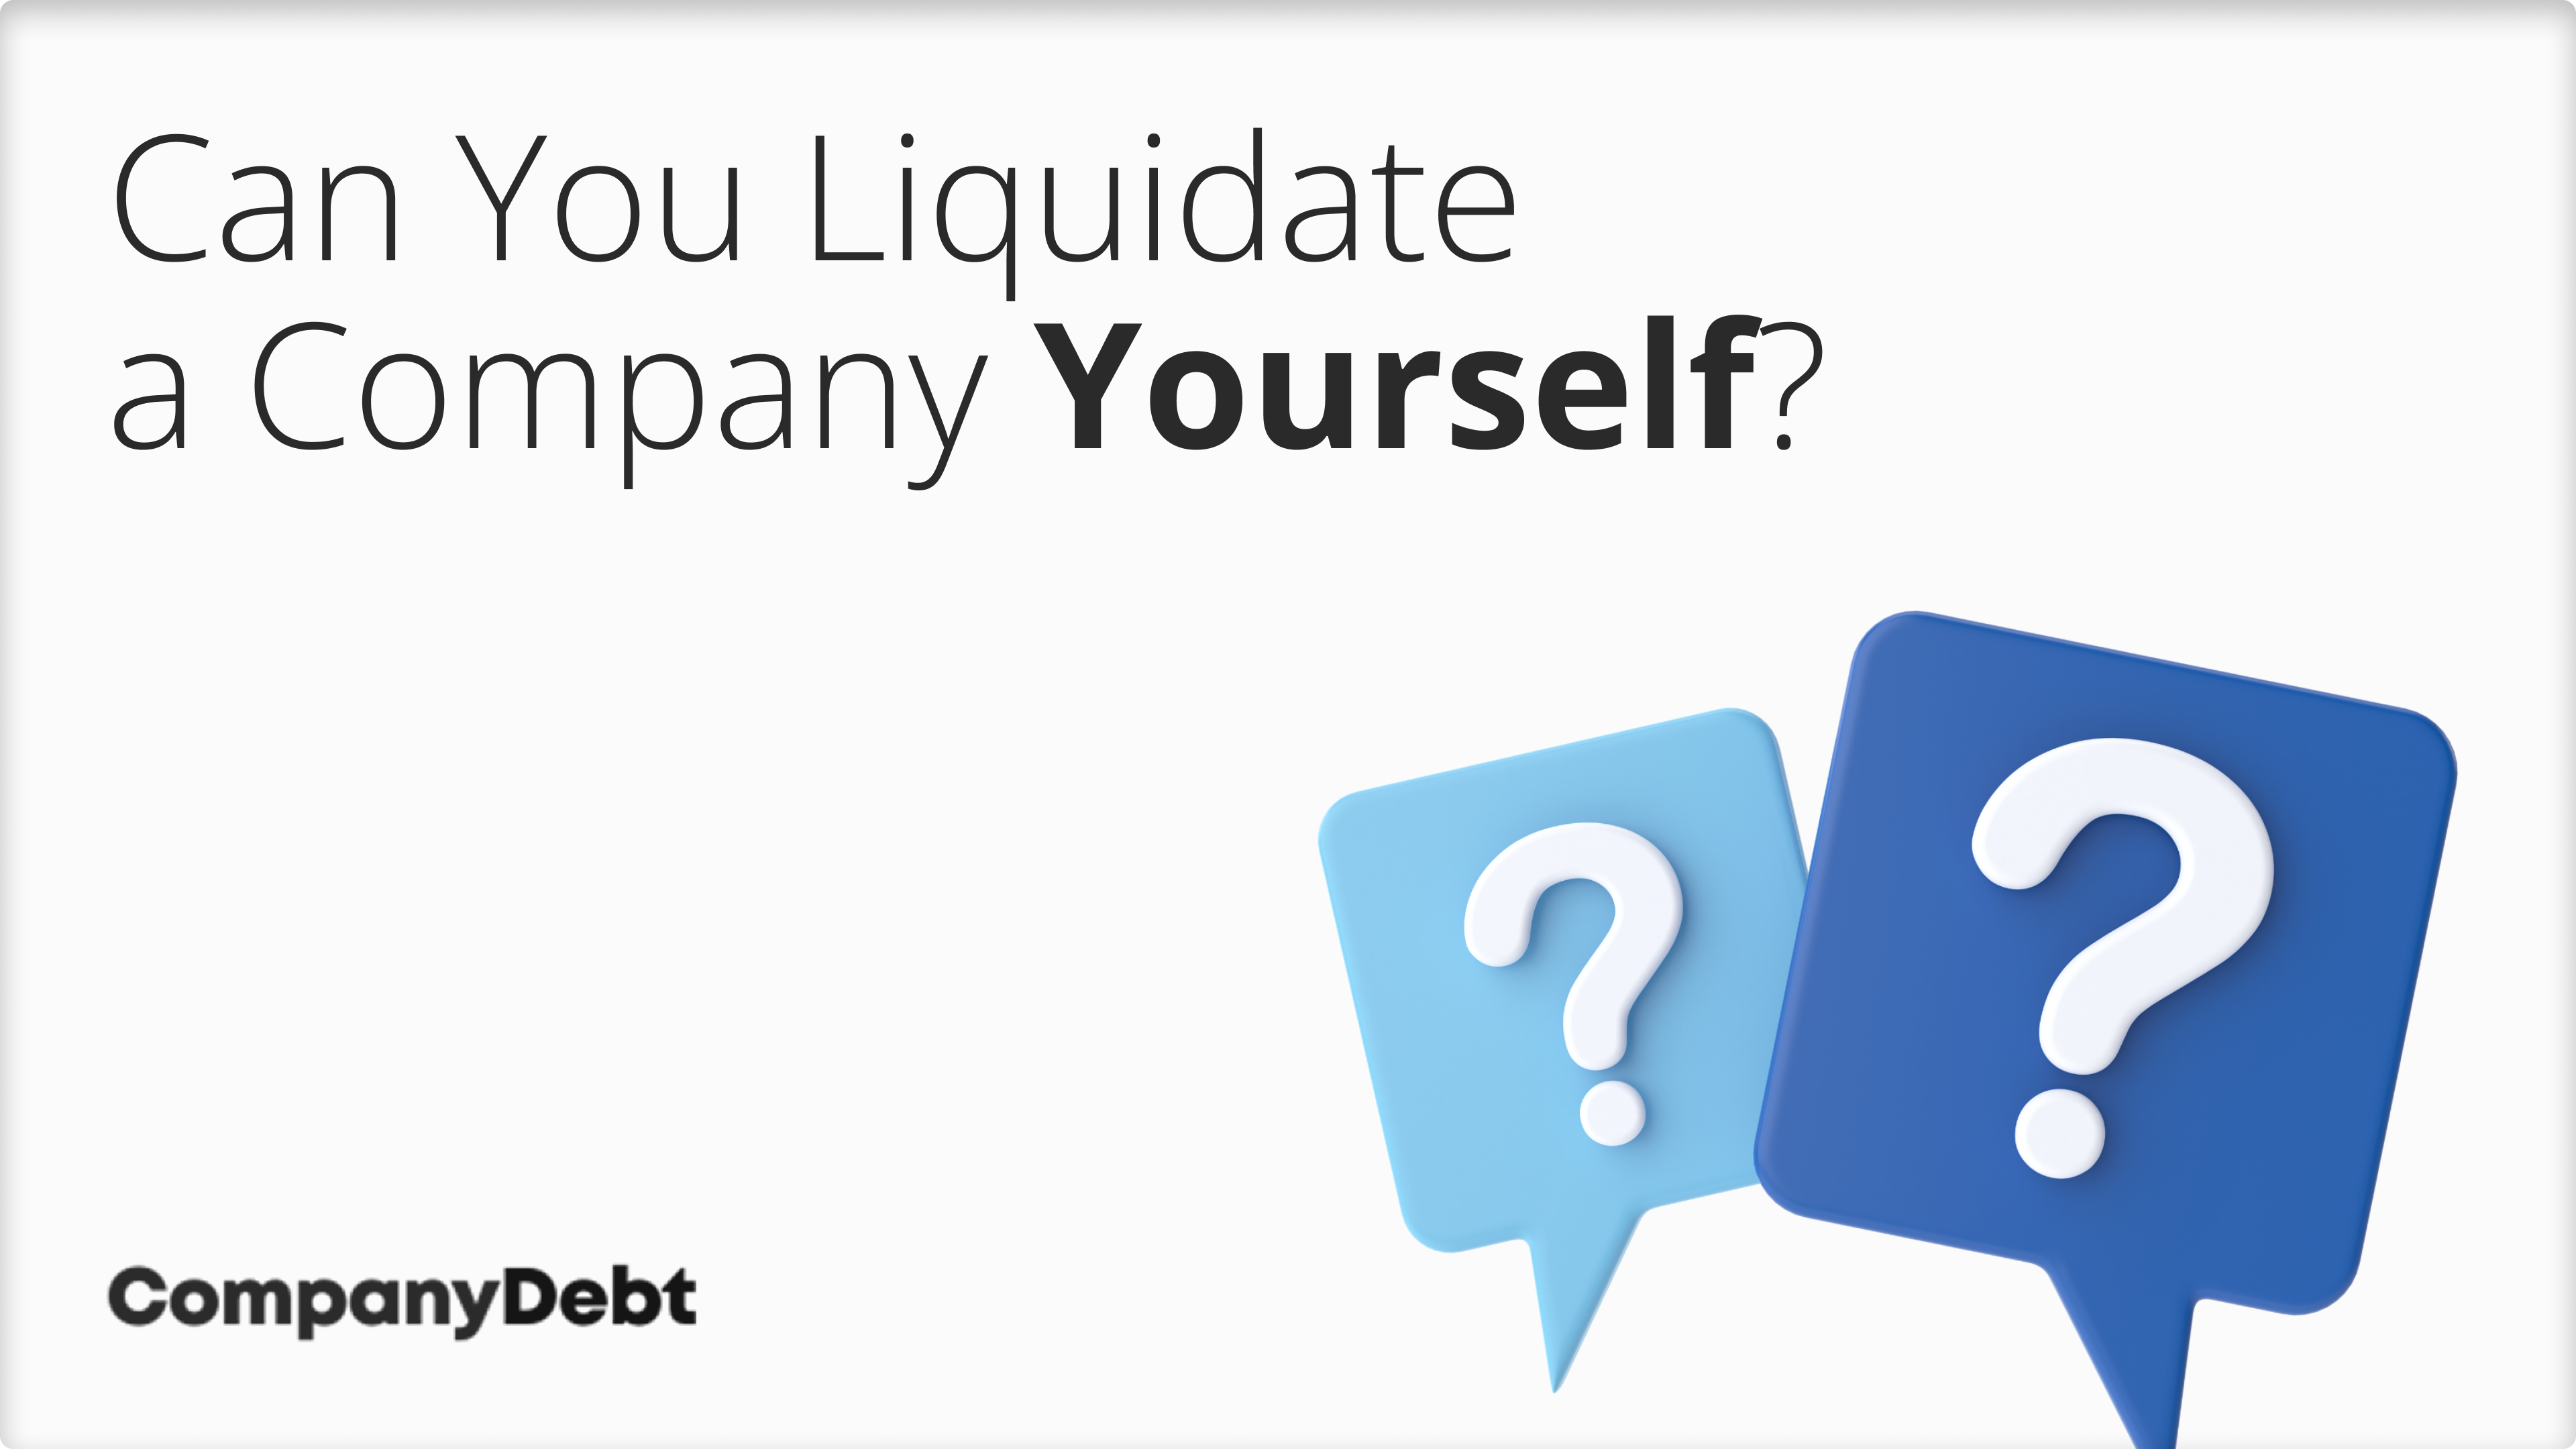 Can You Liquidate a Company Yourself?